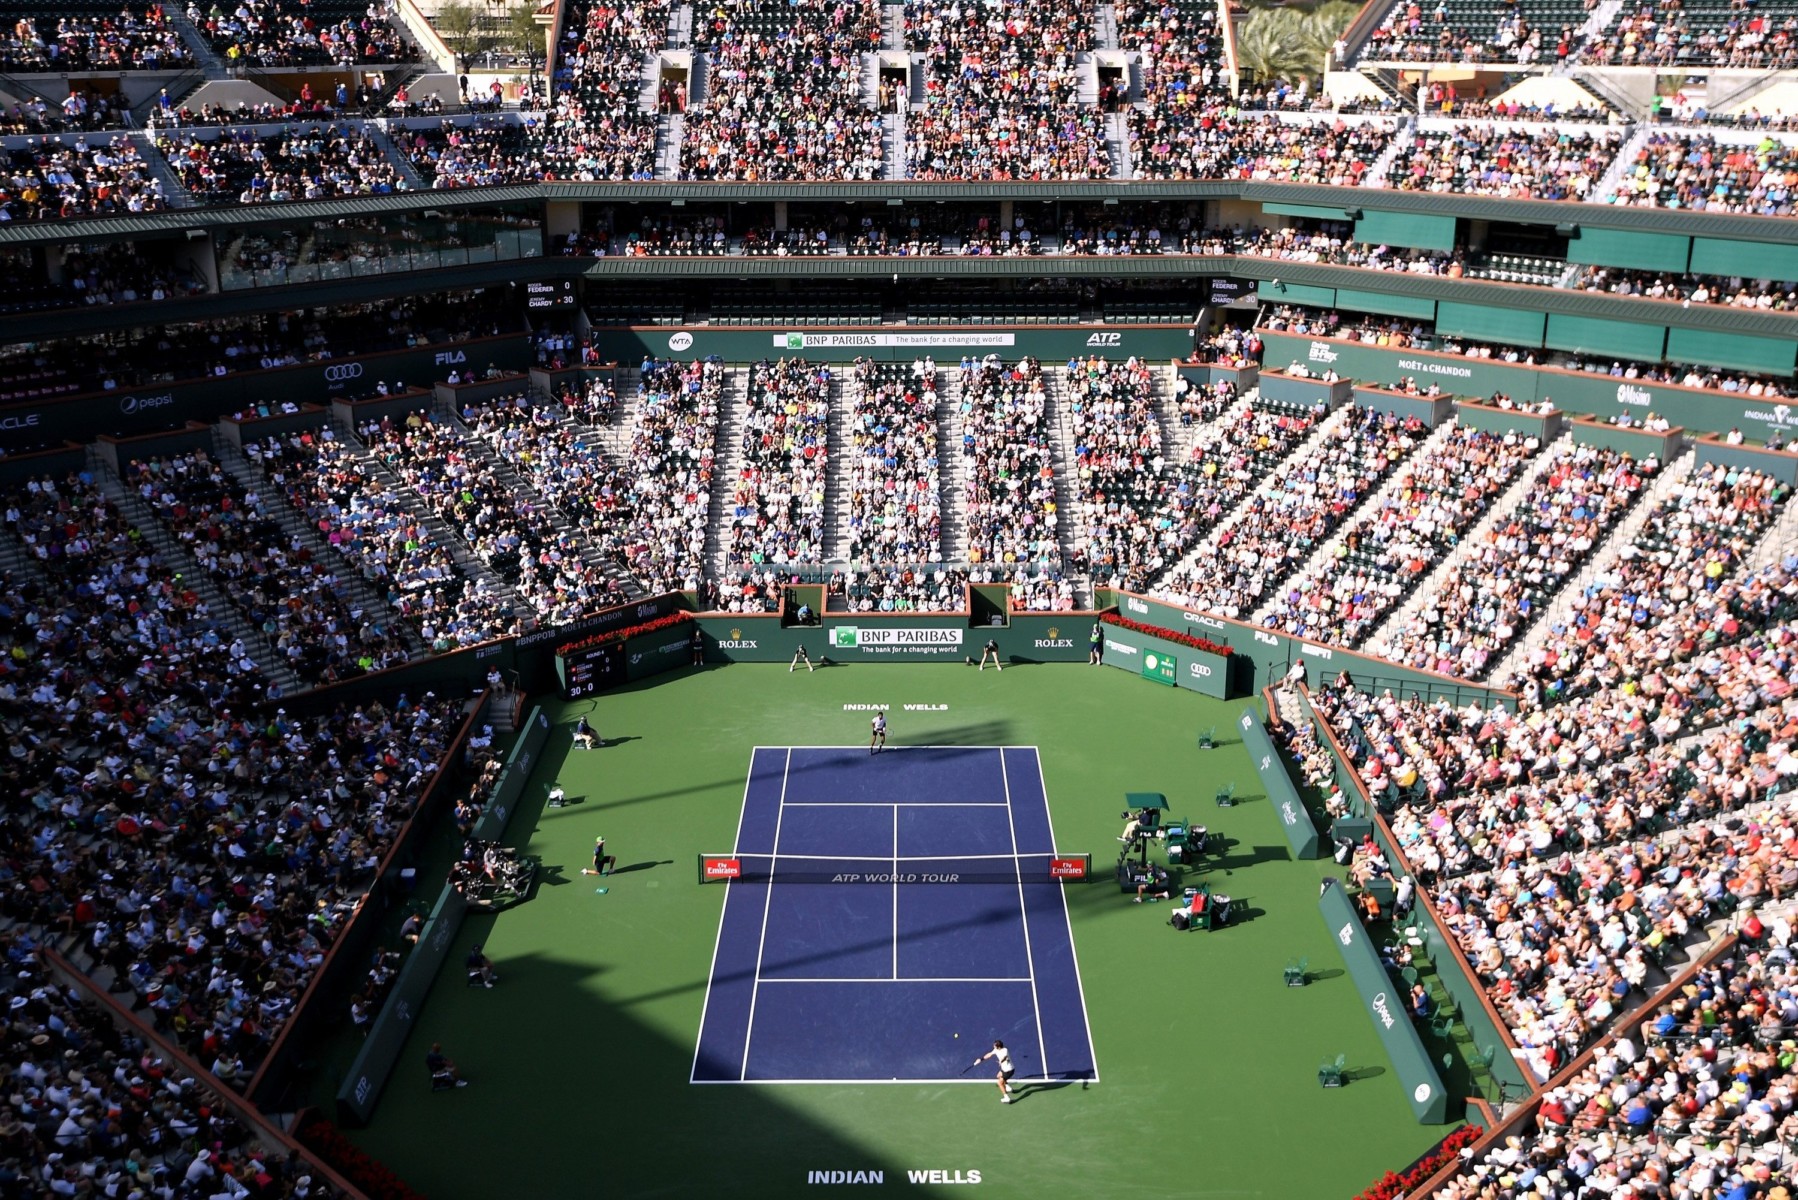 , Has Indian Wells Masters been cancelled due to coronavirus outbreak?